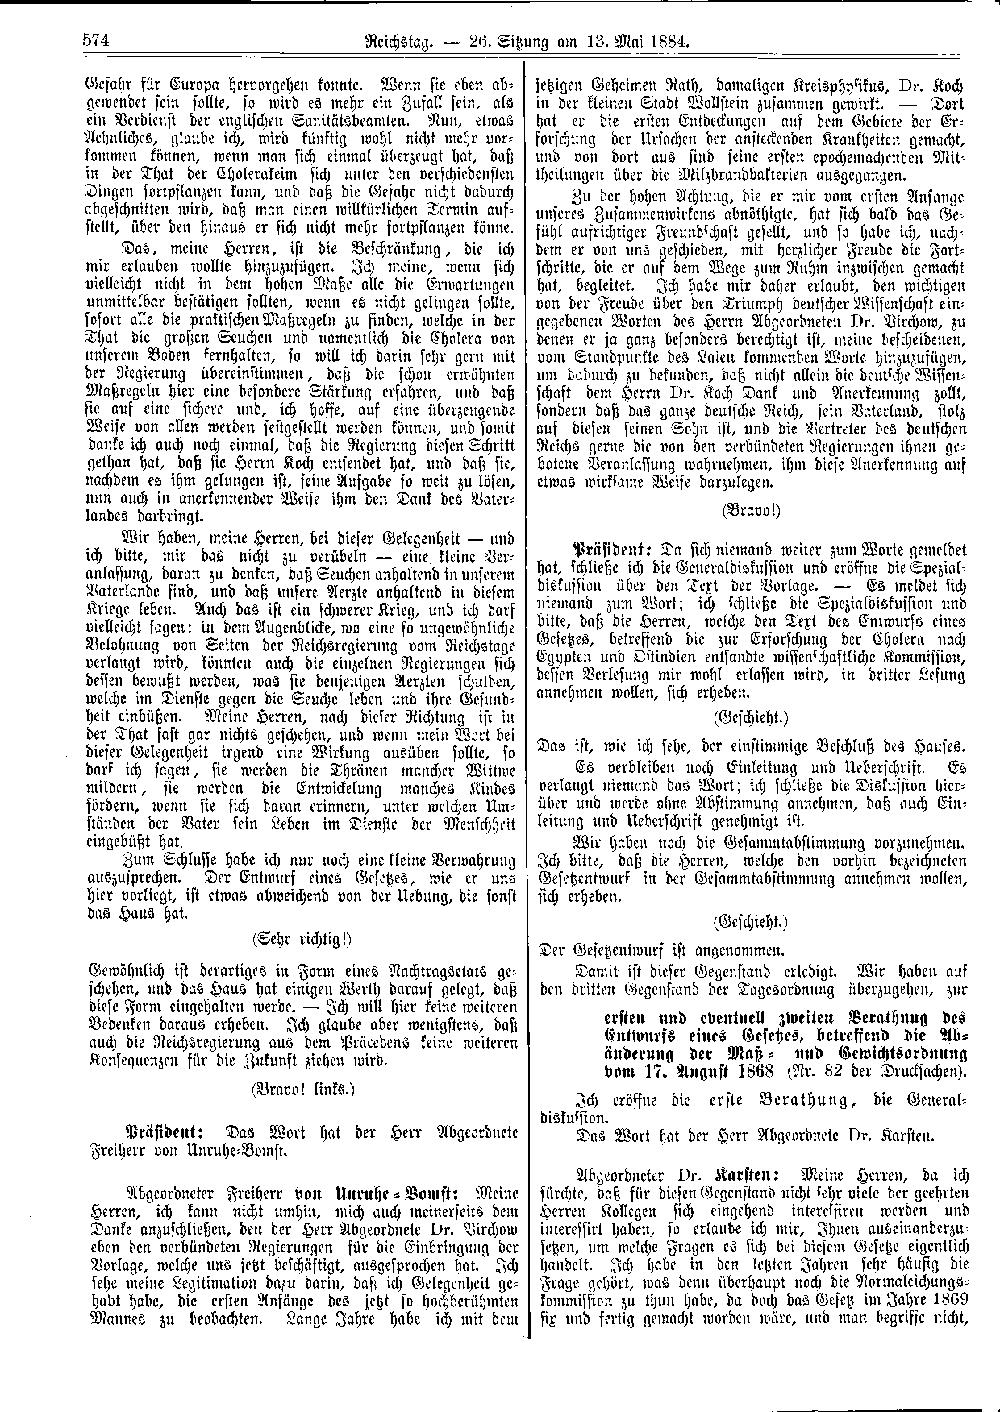 Scan of page 574